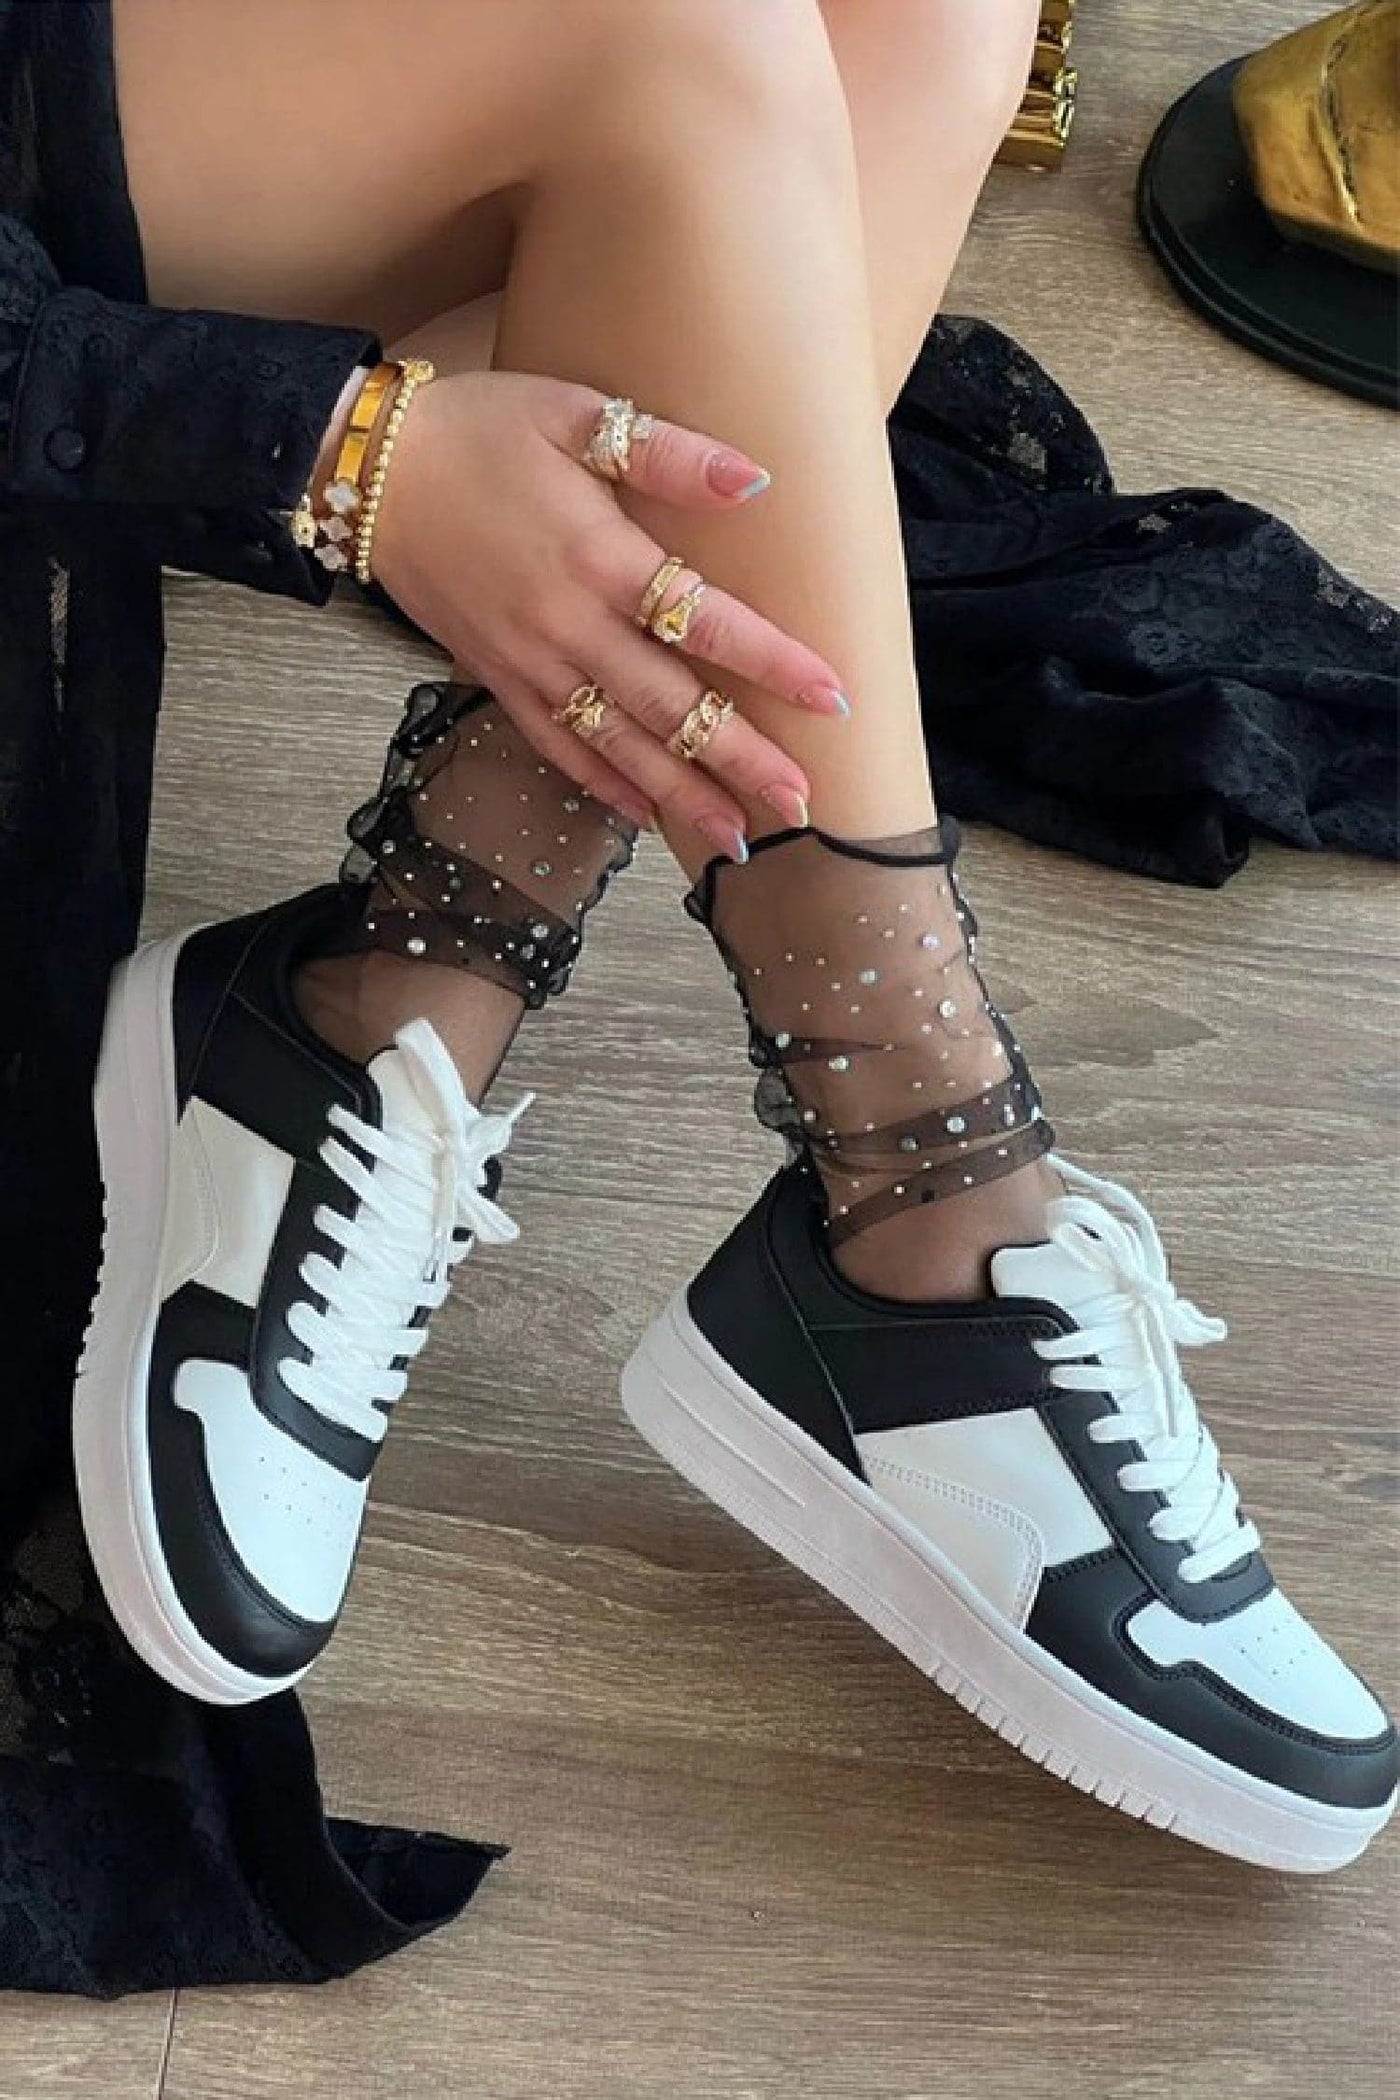 Black/White / 5 Retro Panda Contrast Lace Up Sneakers - Madison and Mallory